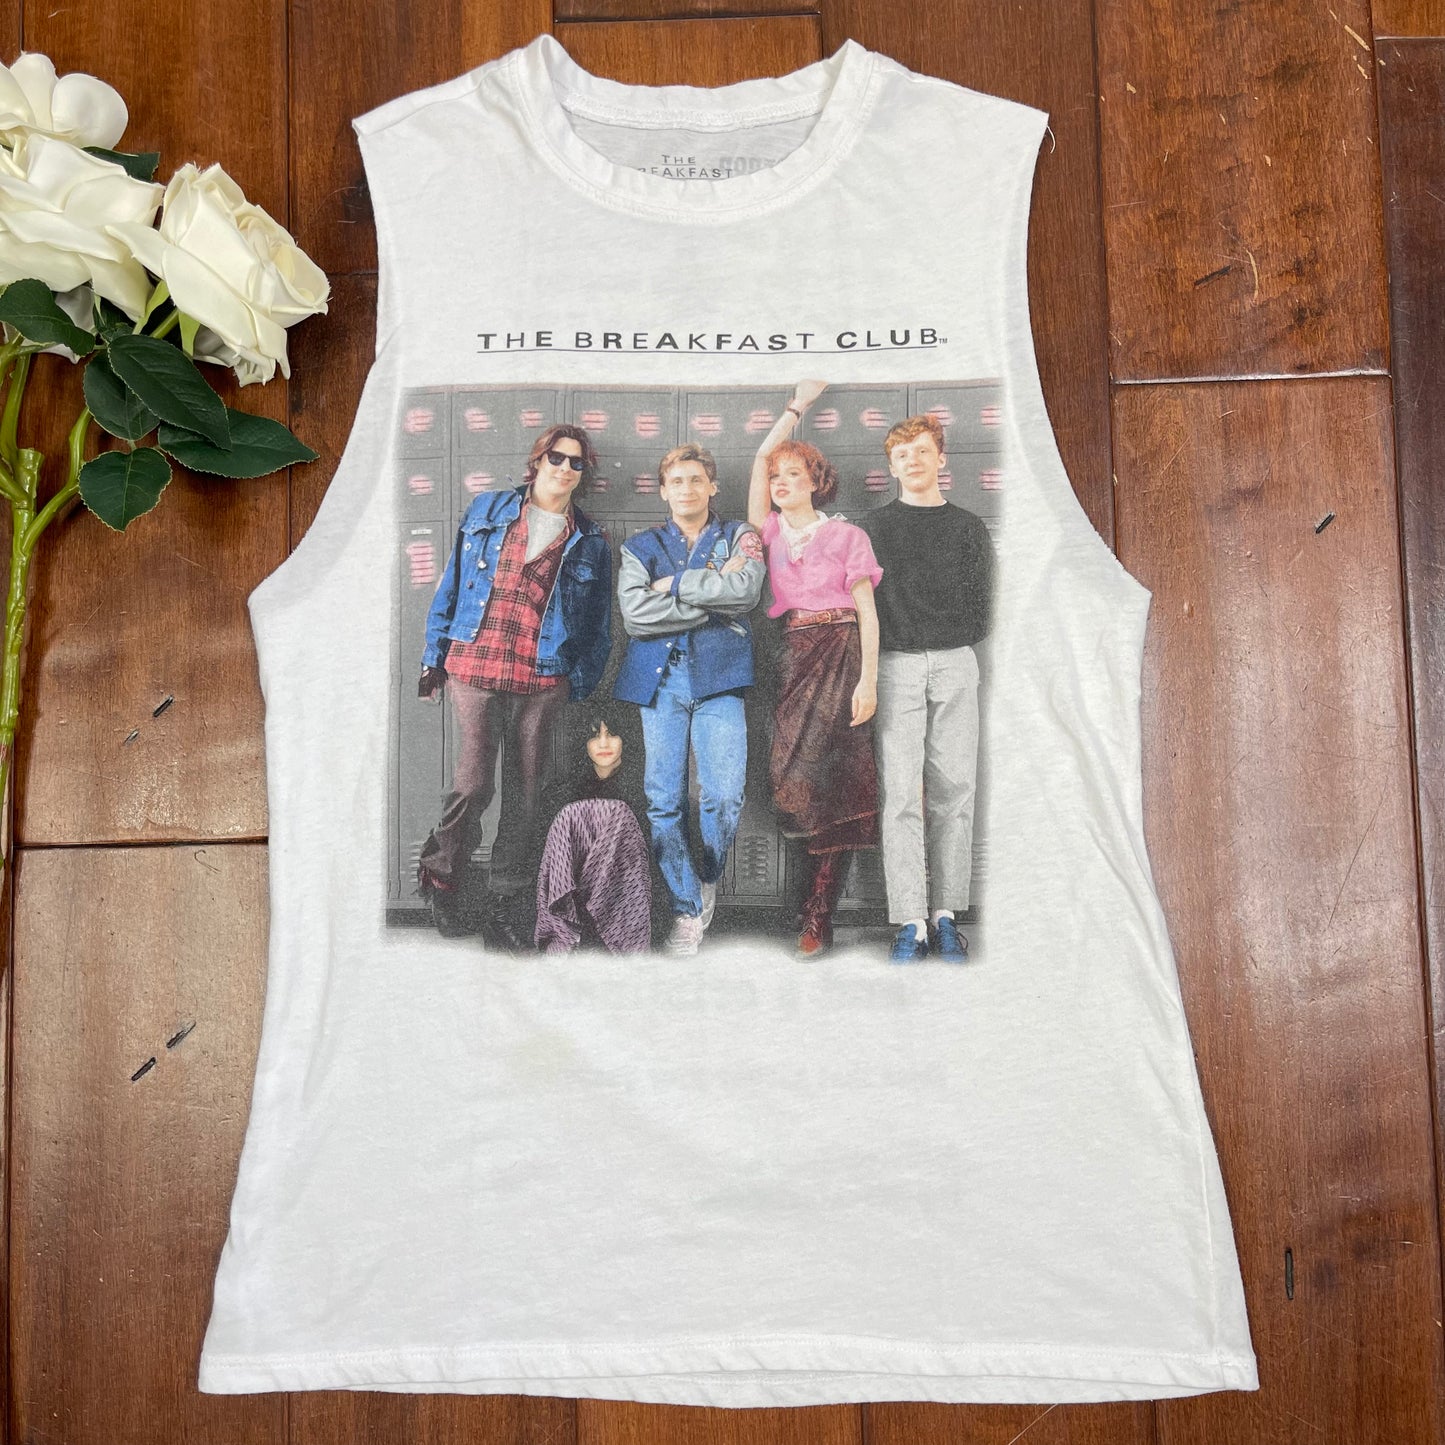 THRIFTED “THE BREAKFAST CLUB” TANK